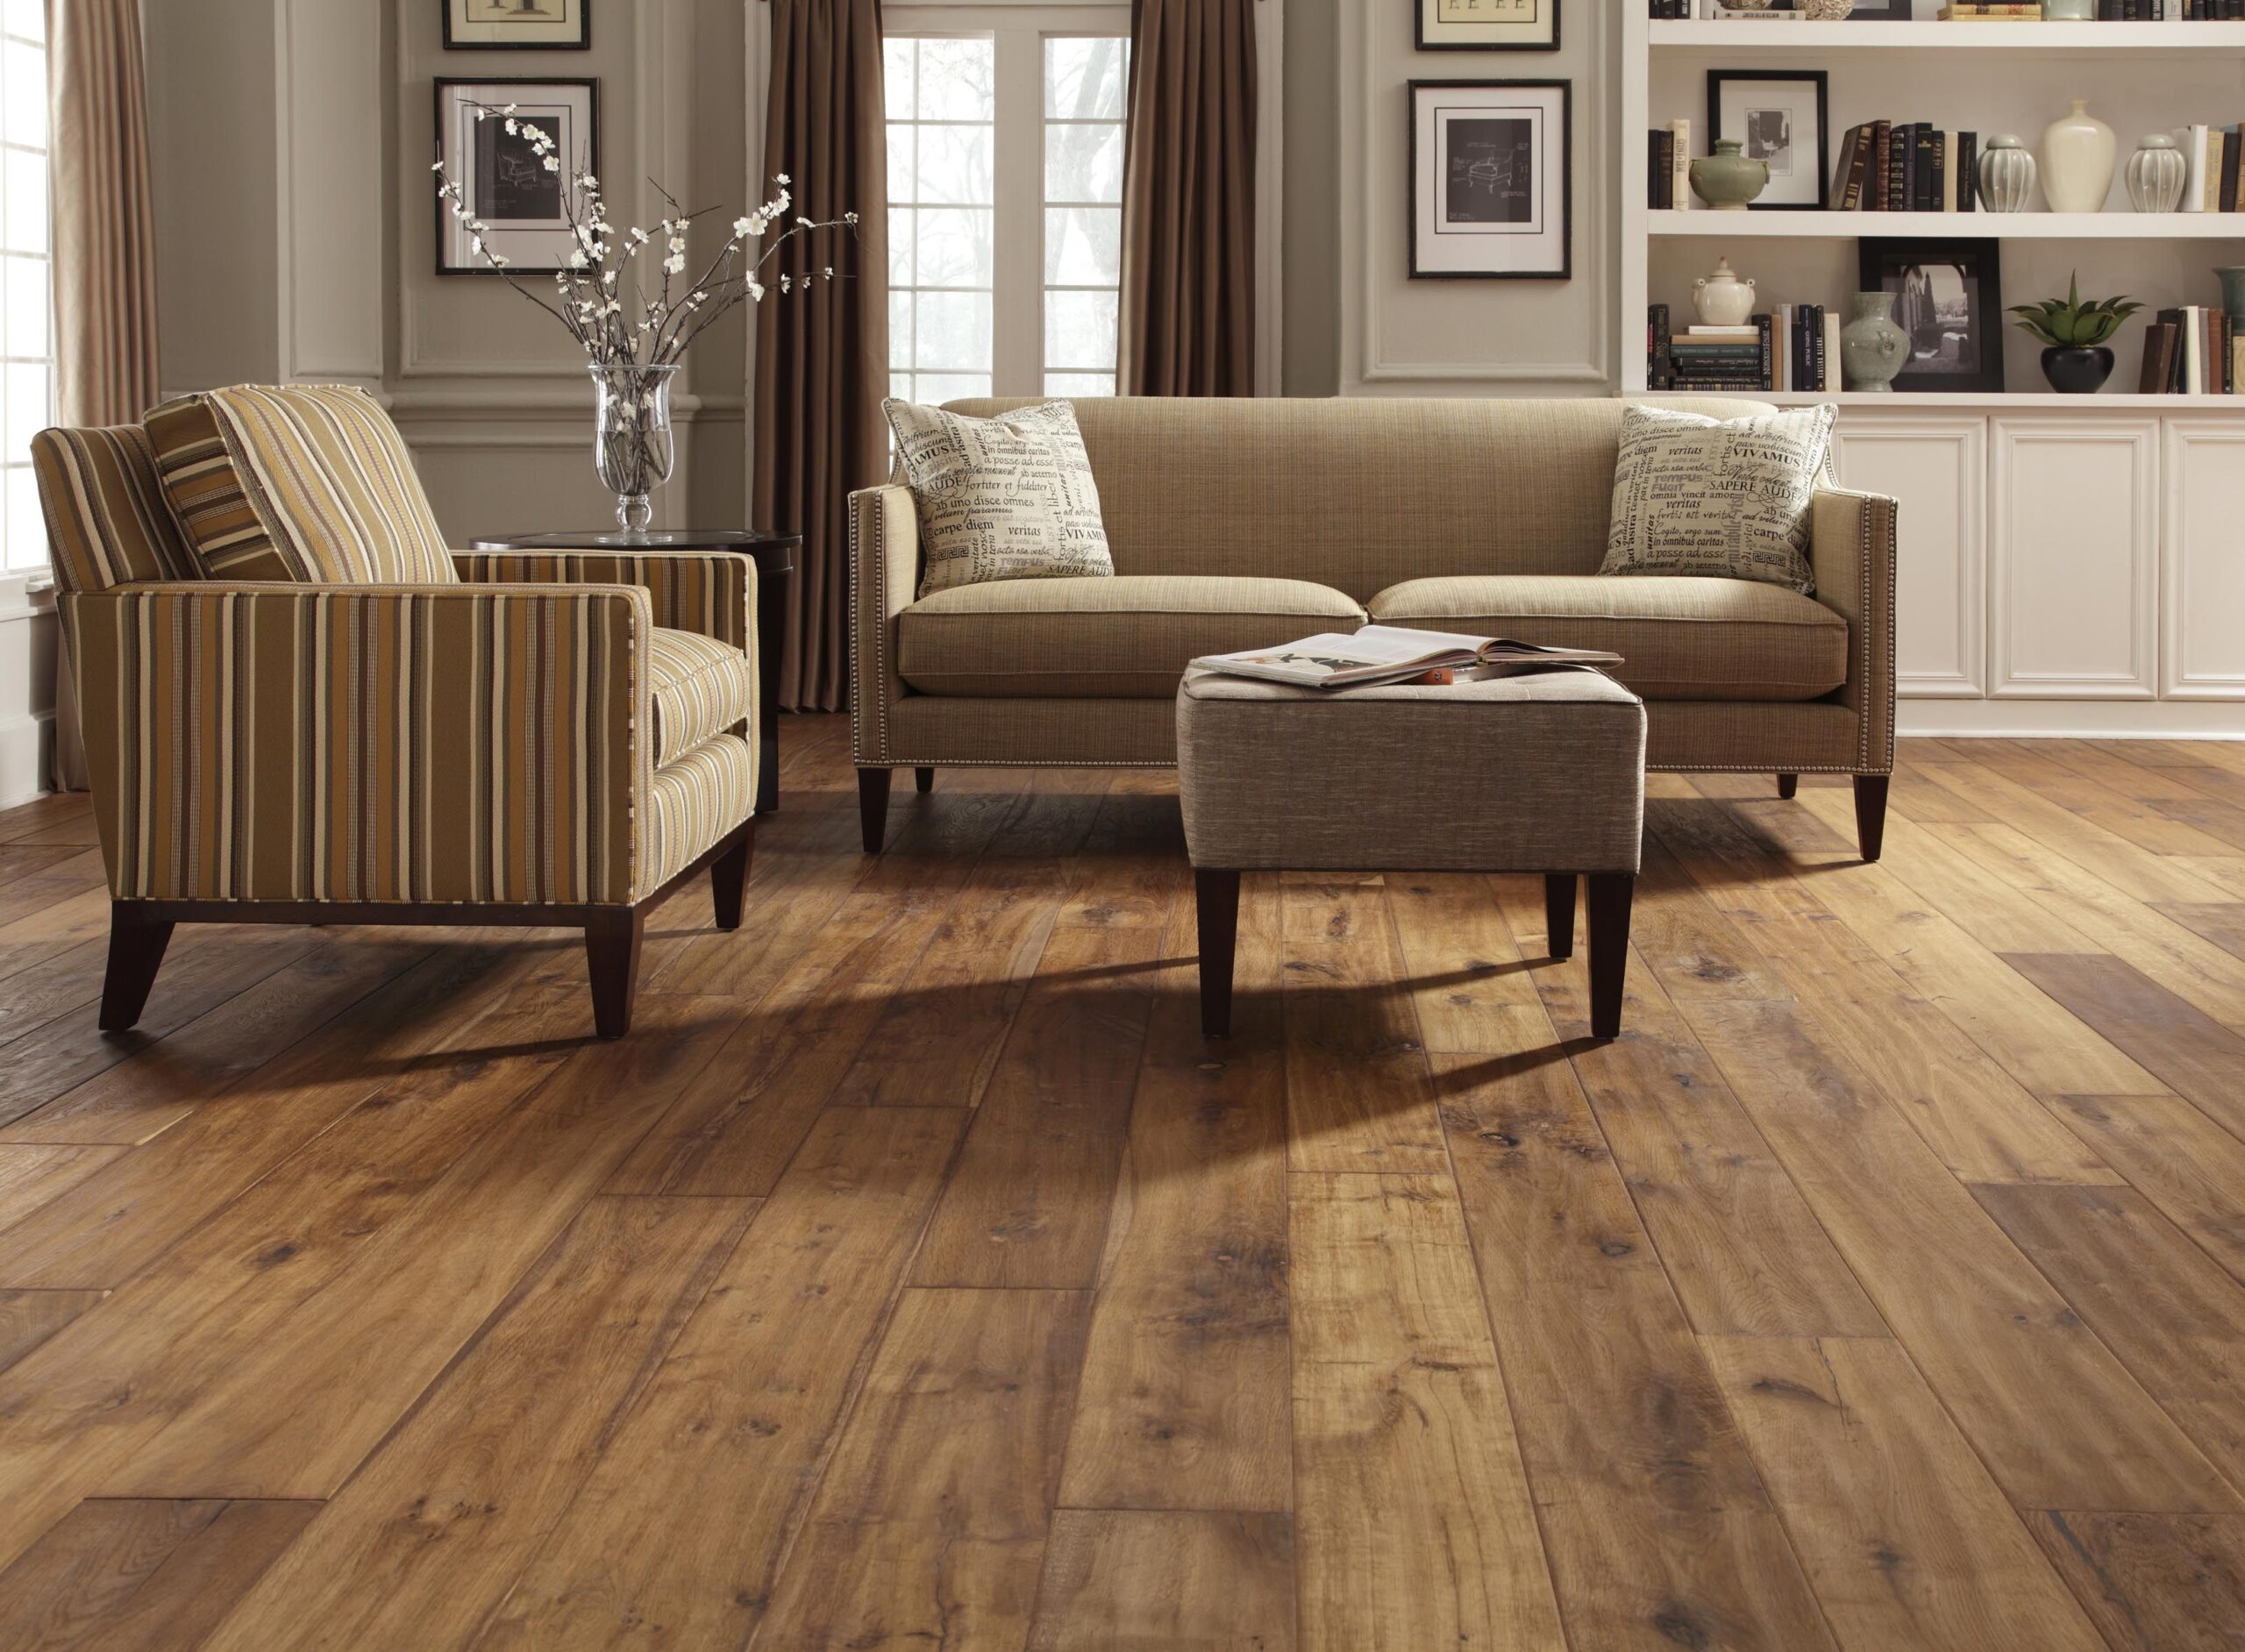 5 Best Laminate Flooring Colours For, What Is The Best Laminate Flooring For Bedrooms